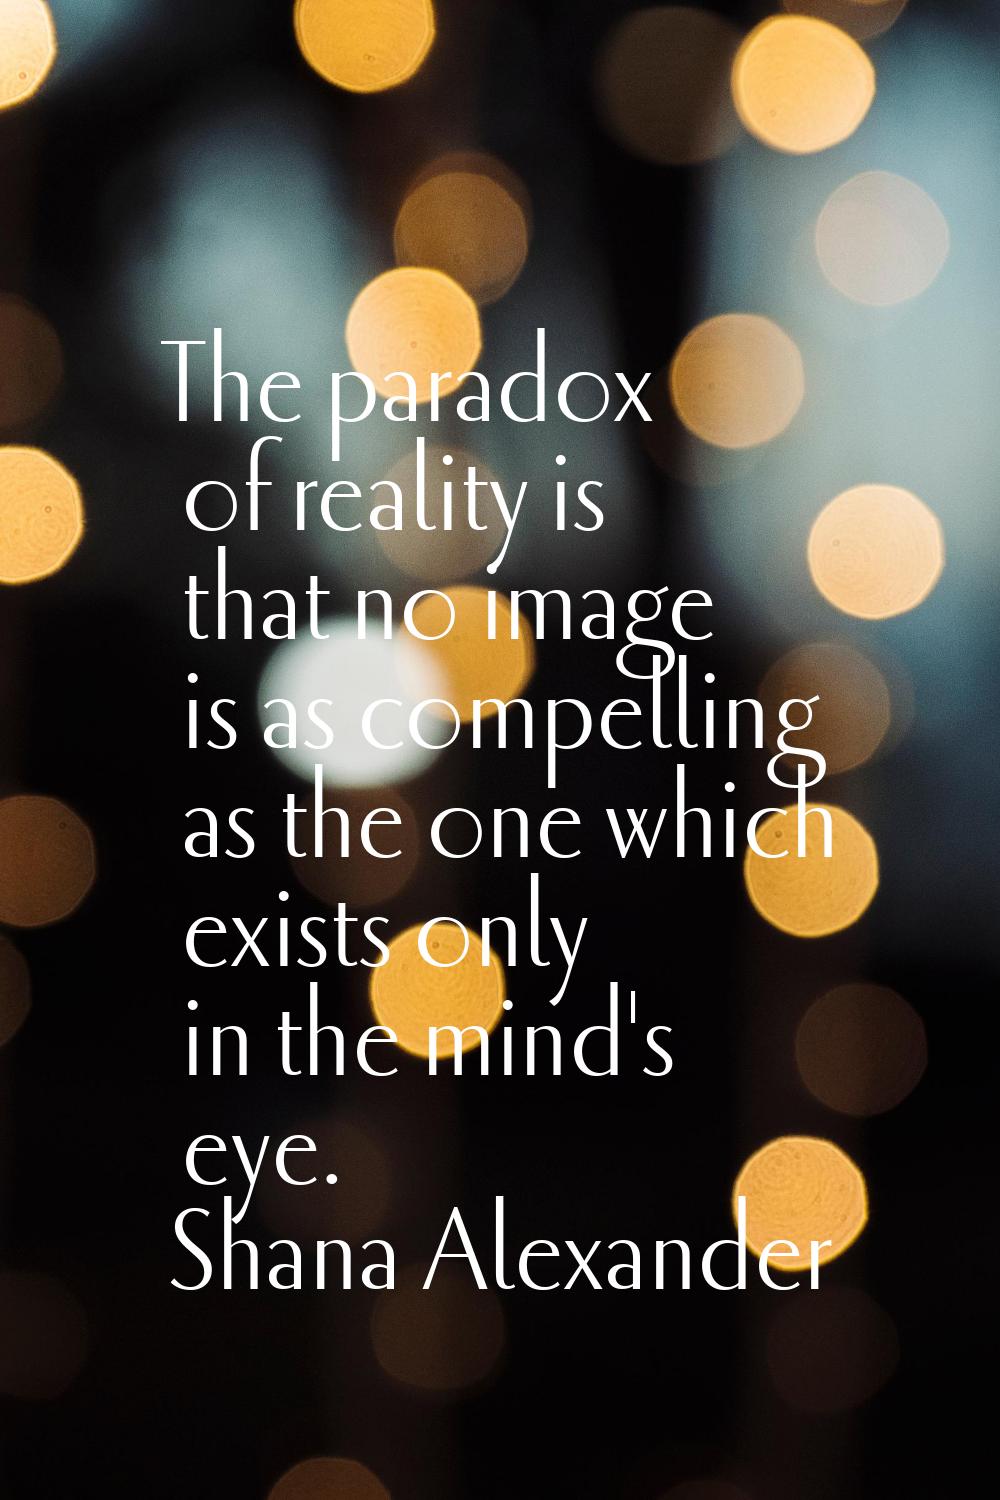 The paradox of reality is that no image is as compelling as the one which exists only in the mind's